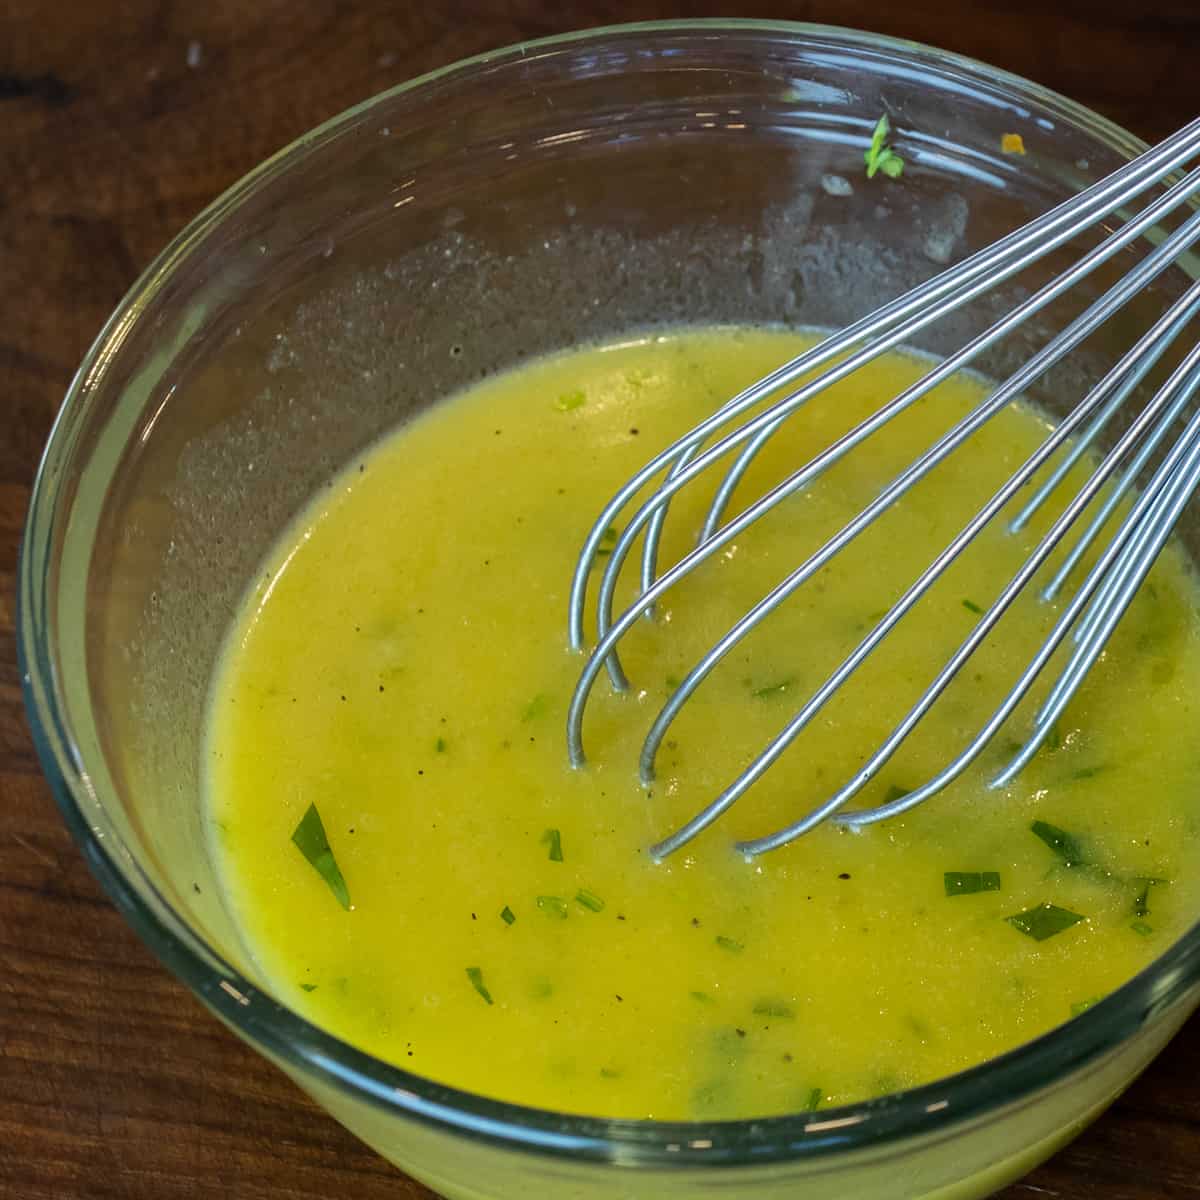 Salad dressing emulsified together with a metal whisk.